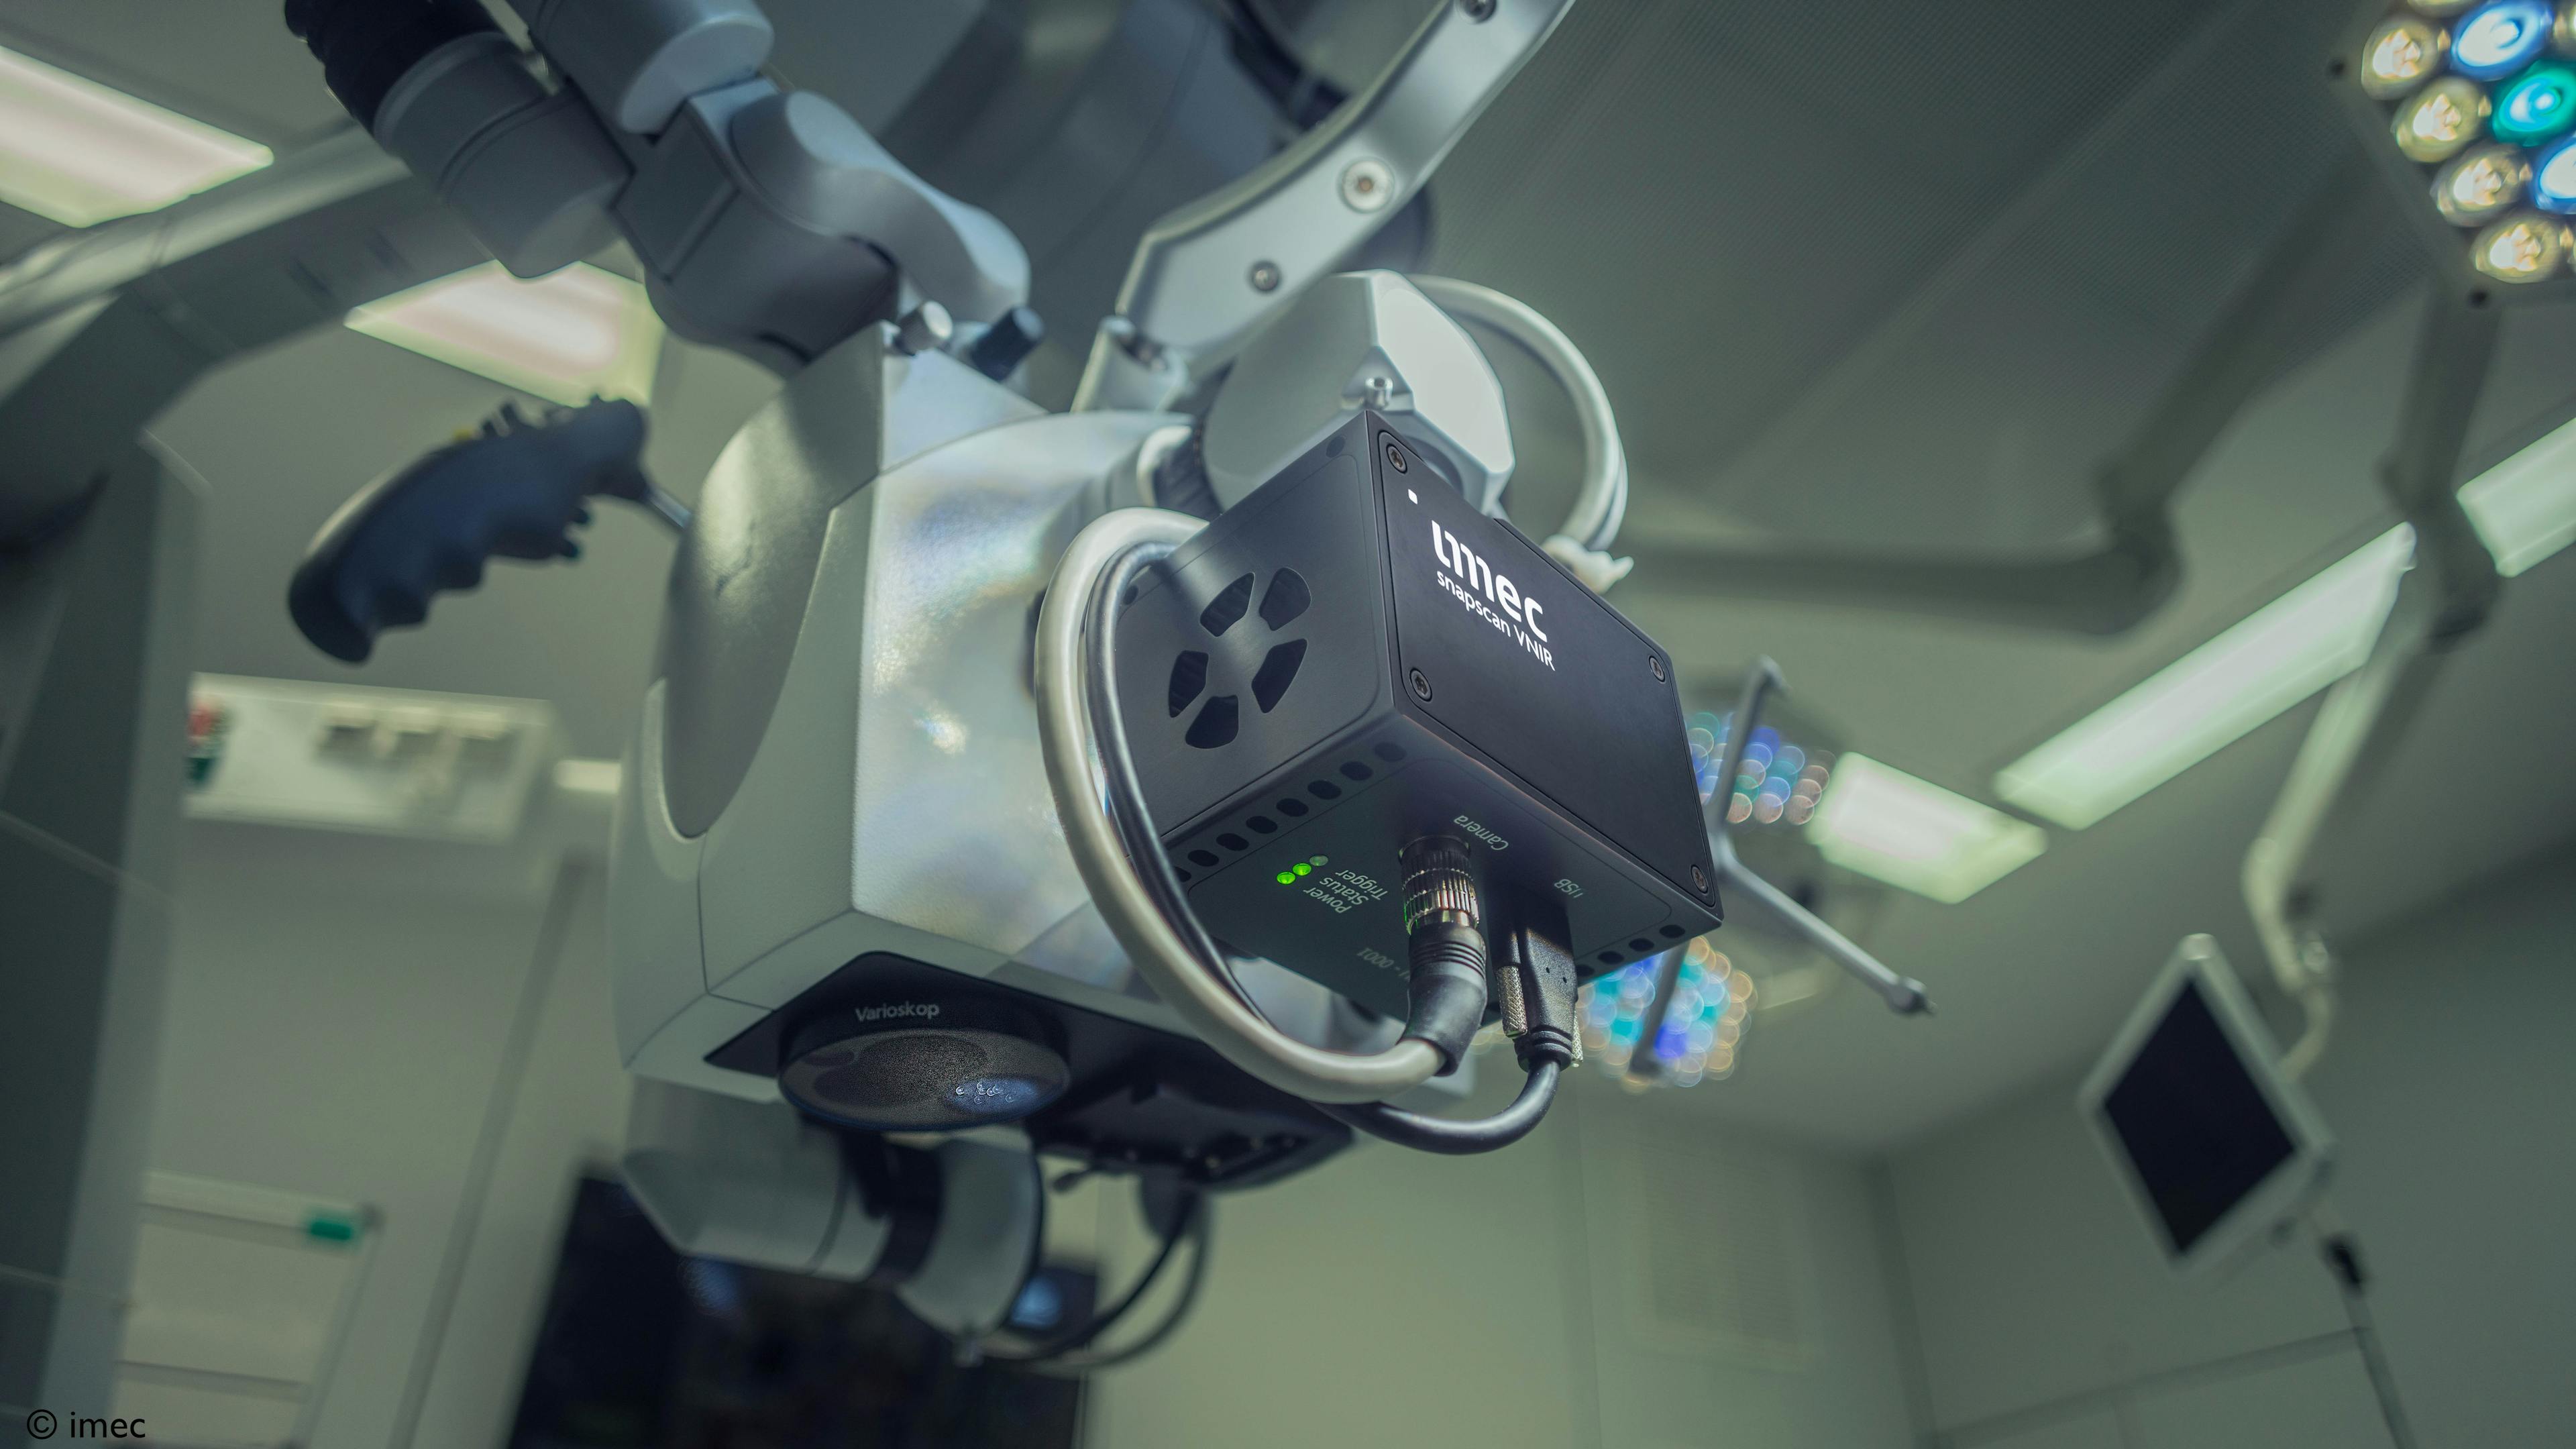 Surgical microscope with hyperspectral camera